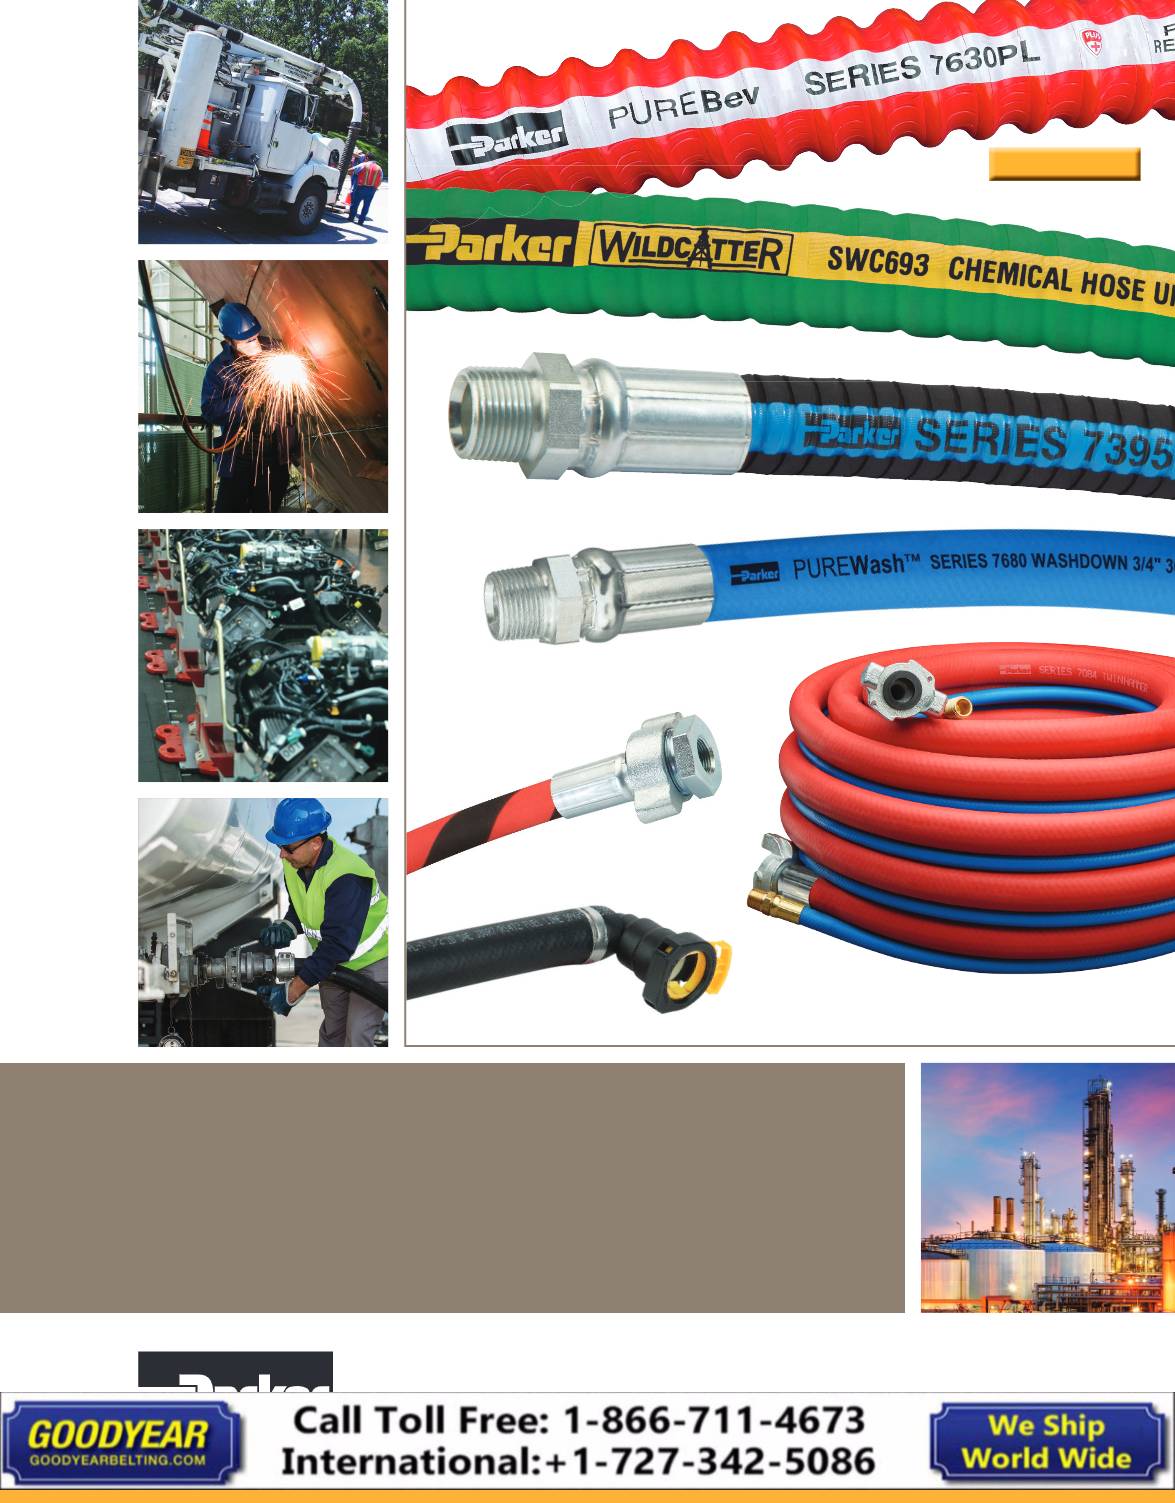 Catalog-4800-Parker-Industrial-Hosewatermarked